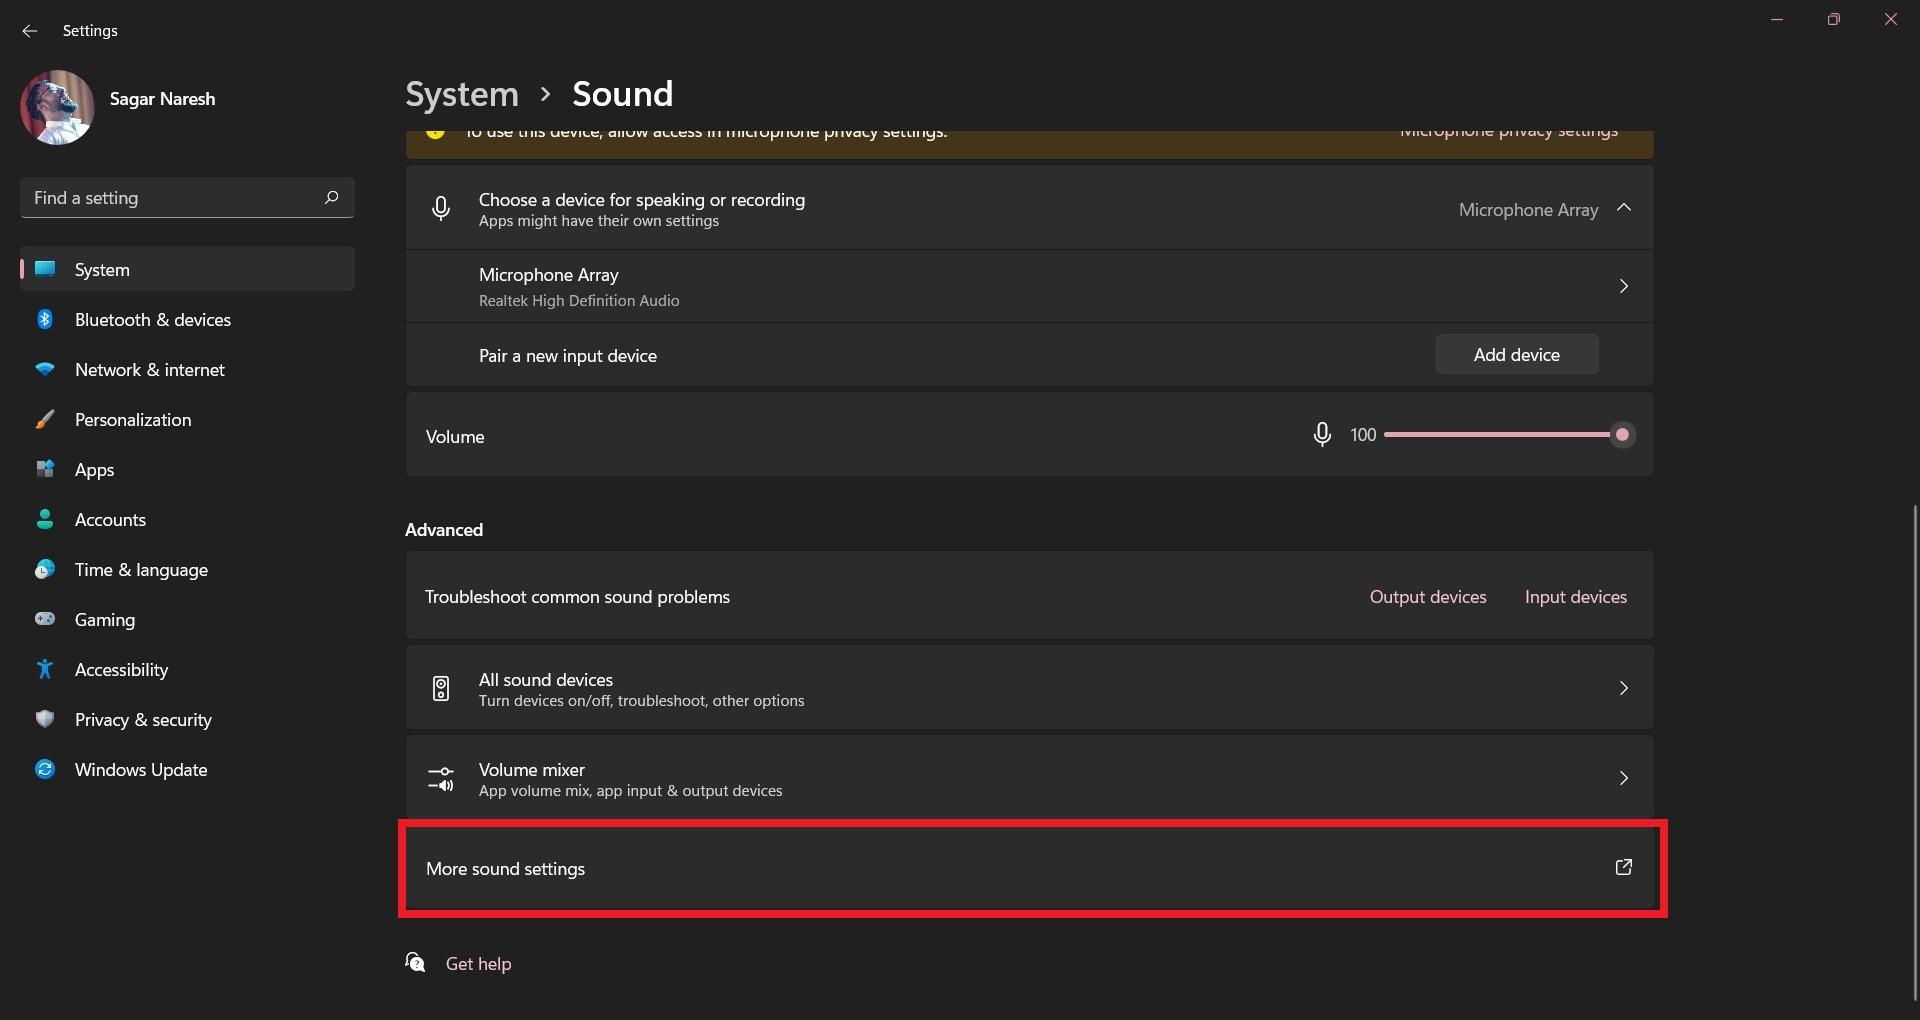 More-Sound-Settings